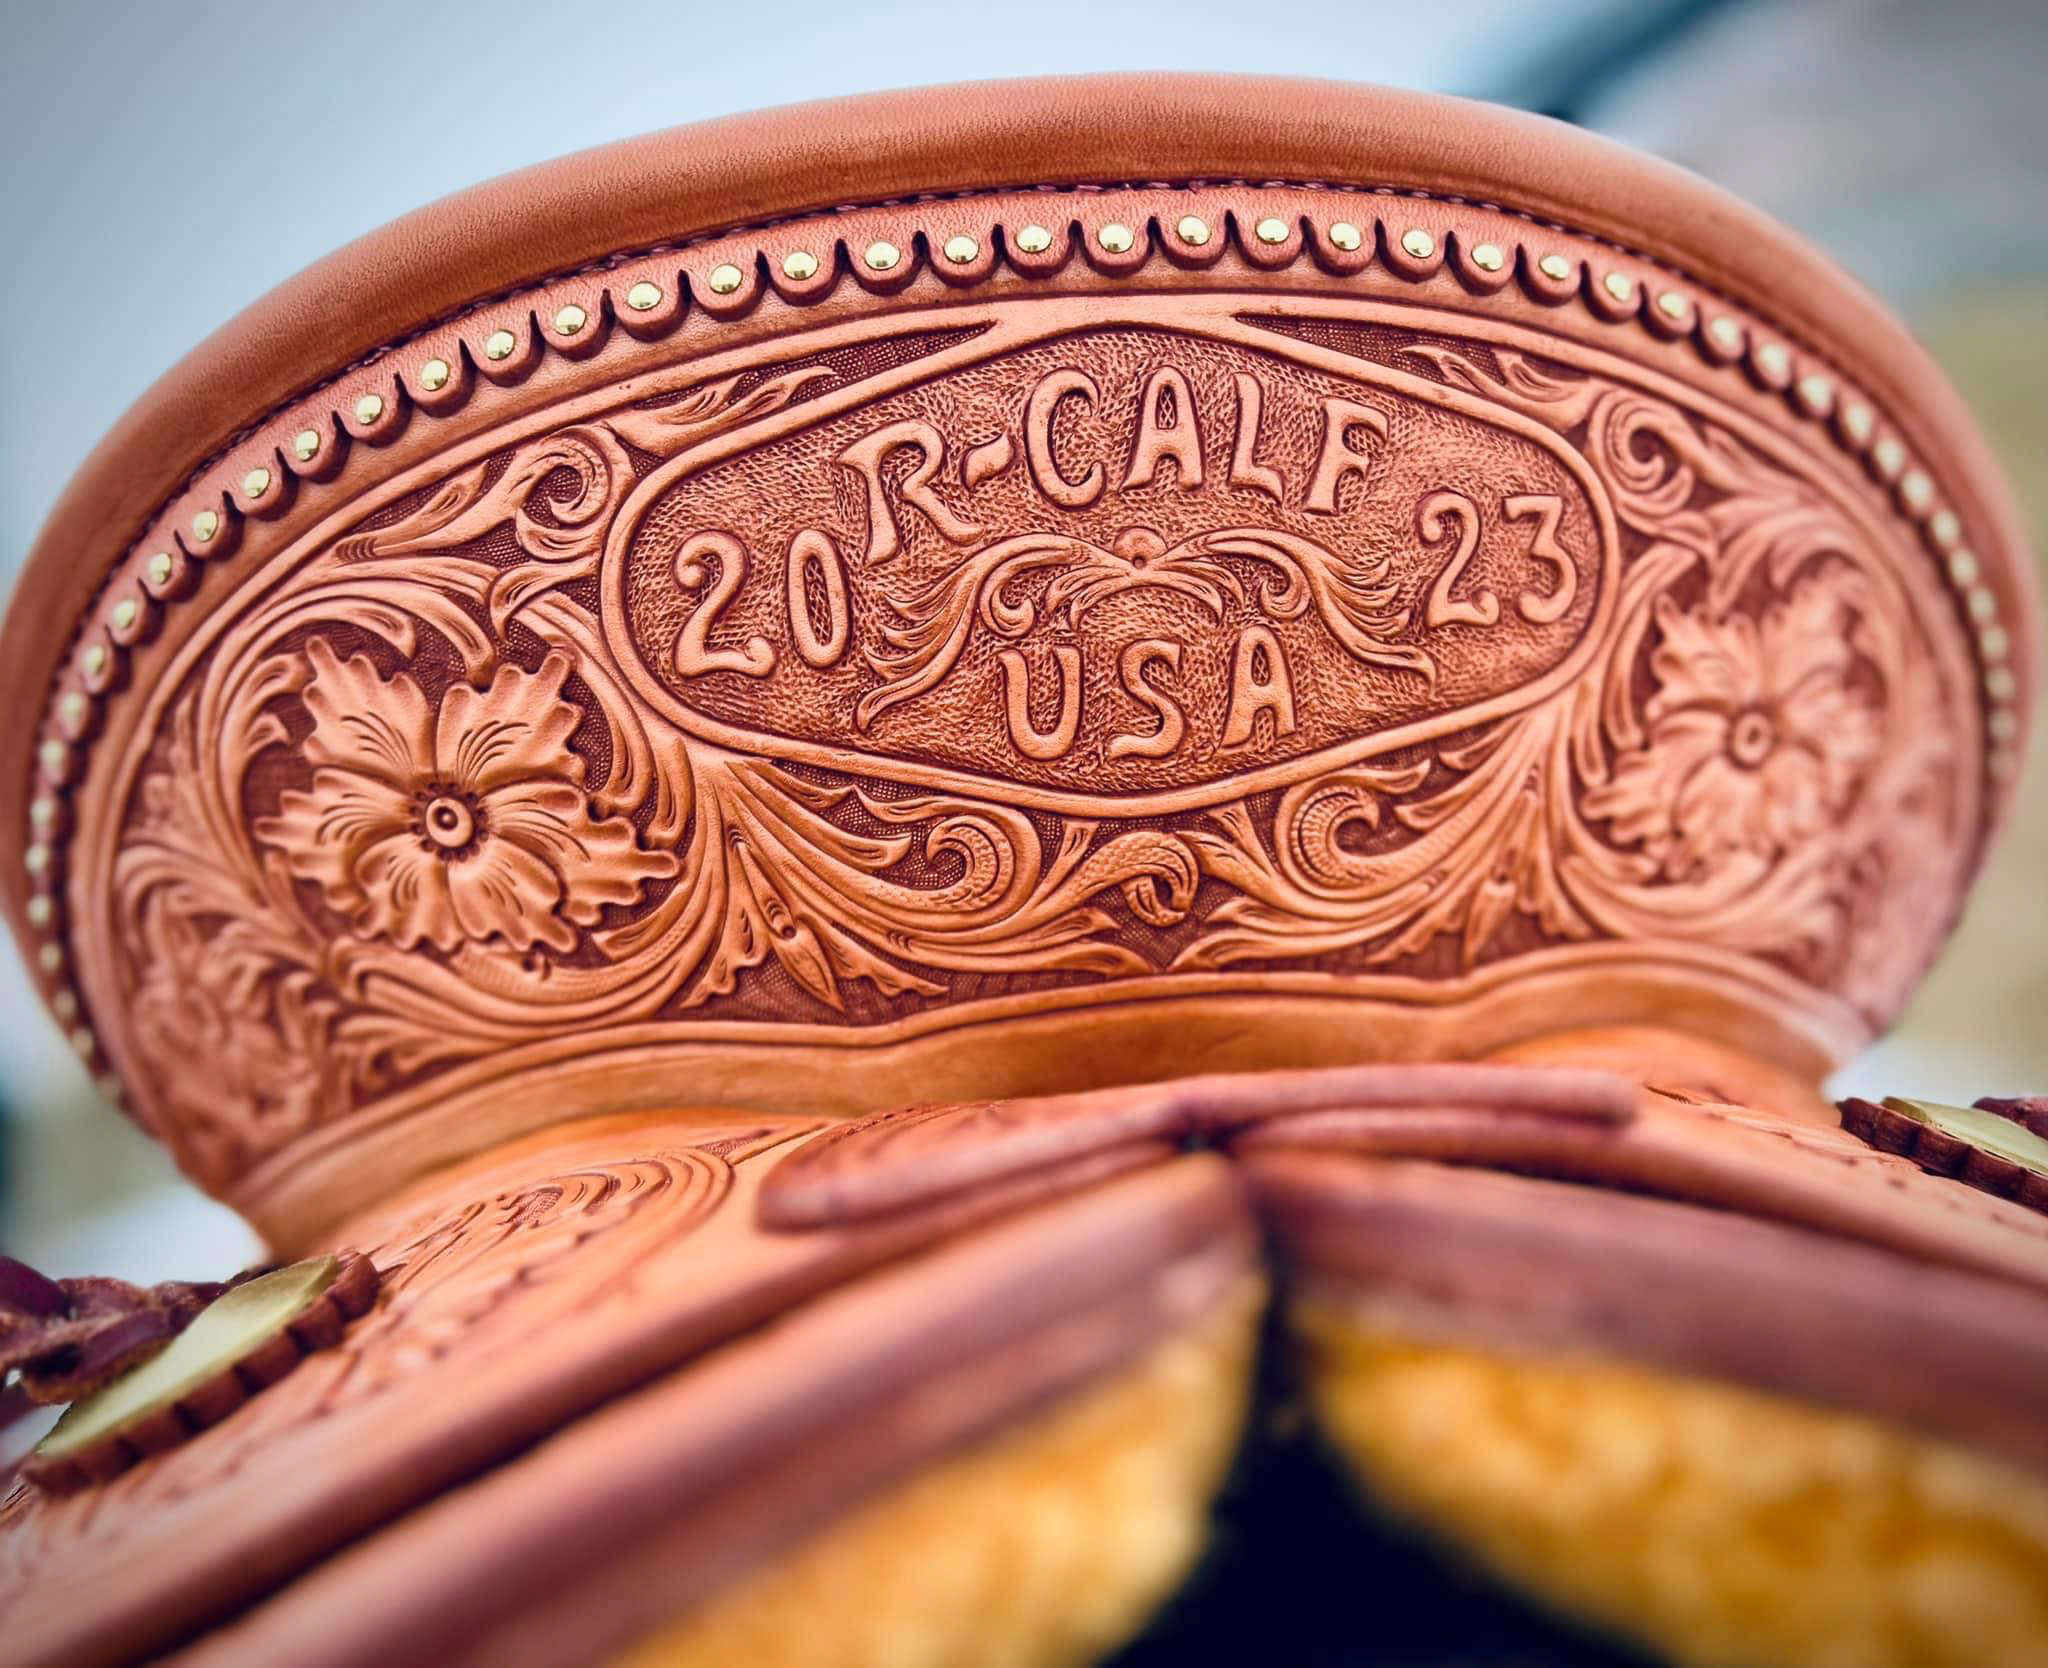 A seat section of a leather saddle with ornate flowers and designs, and stylistic lettering that reads "R-CALF USA 2023"